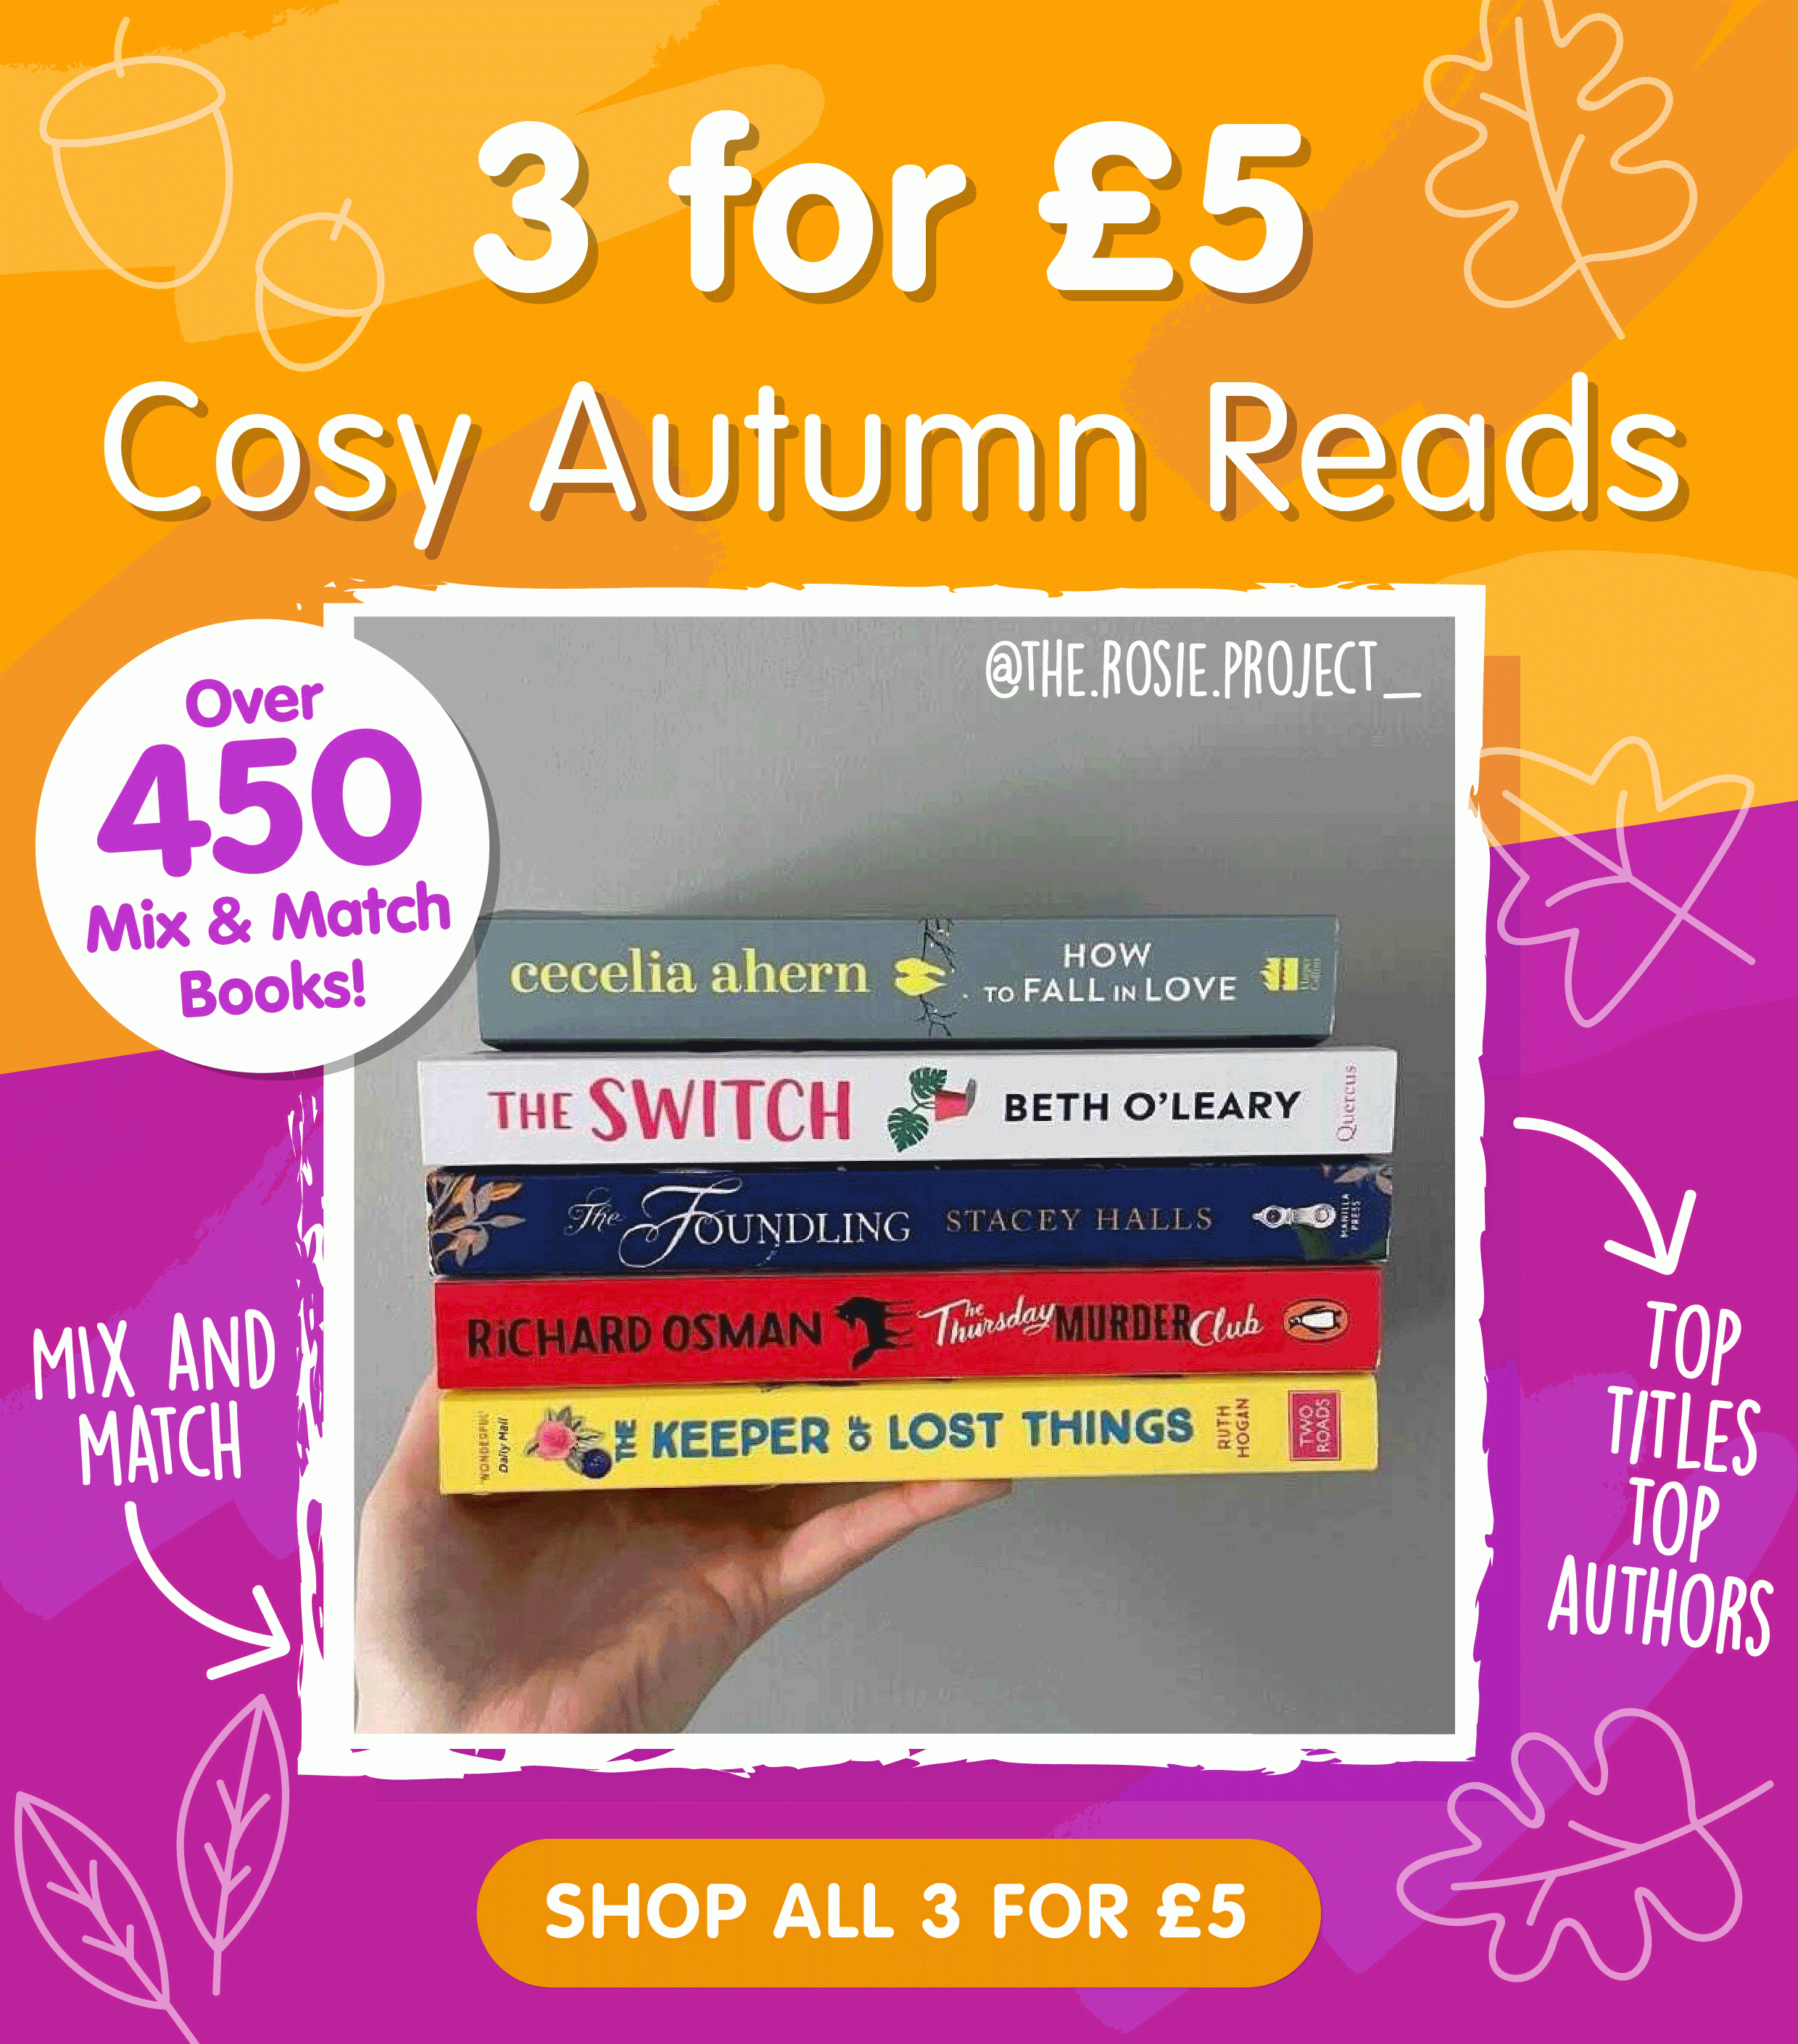 3 for £5 Autumn Reads